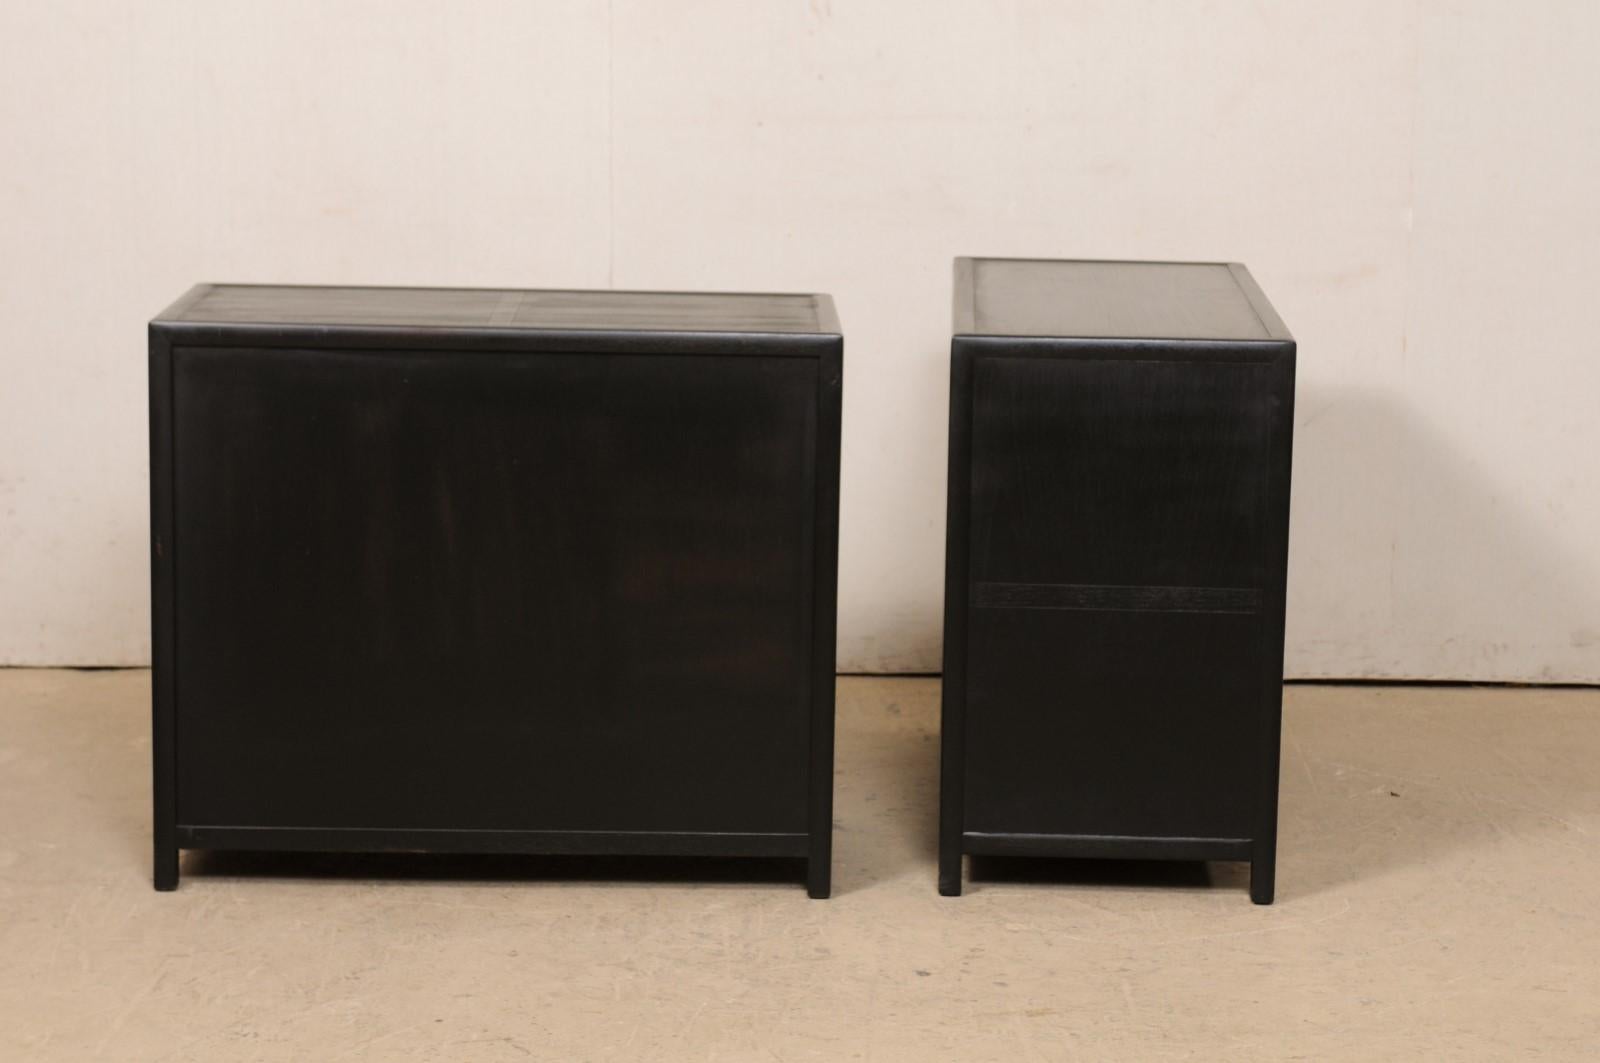 Pair Vintage Chest of Drawers in Black with Silver Hardware, Clean Modern Design For Sale 2